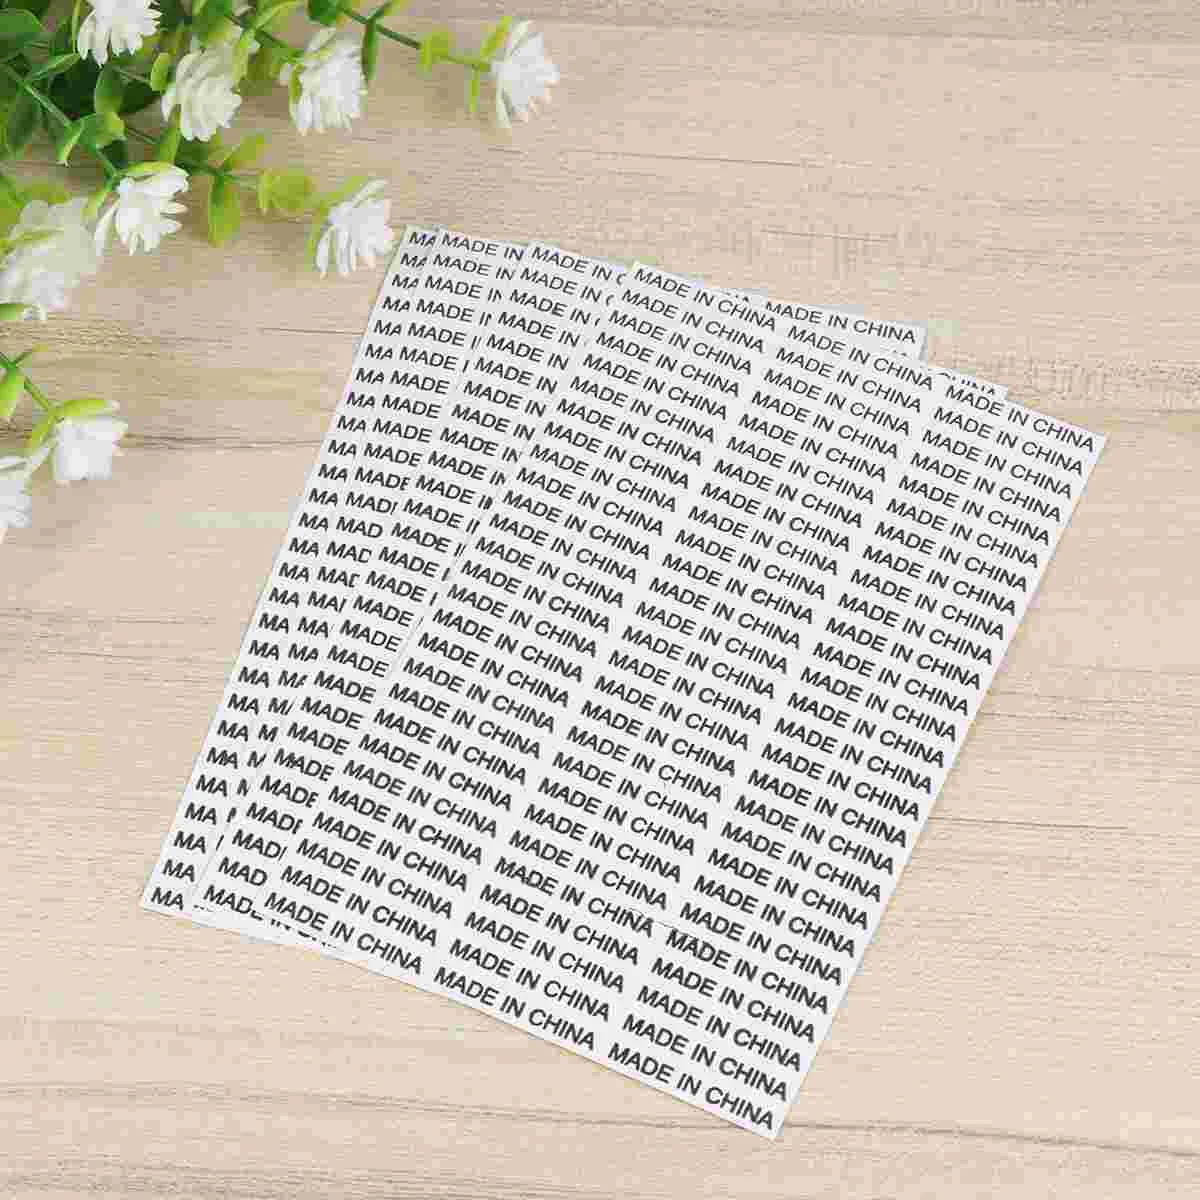 

5000 Pcs Made in China Stickers Waterproof Self Adhesive Labels Package Stickers Show Country of Origin on China Imported